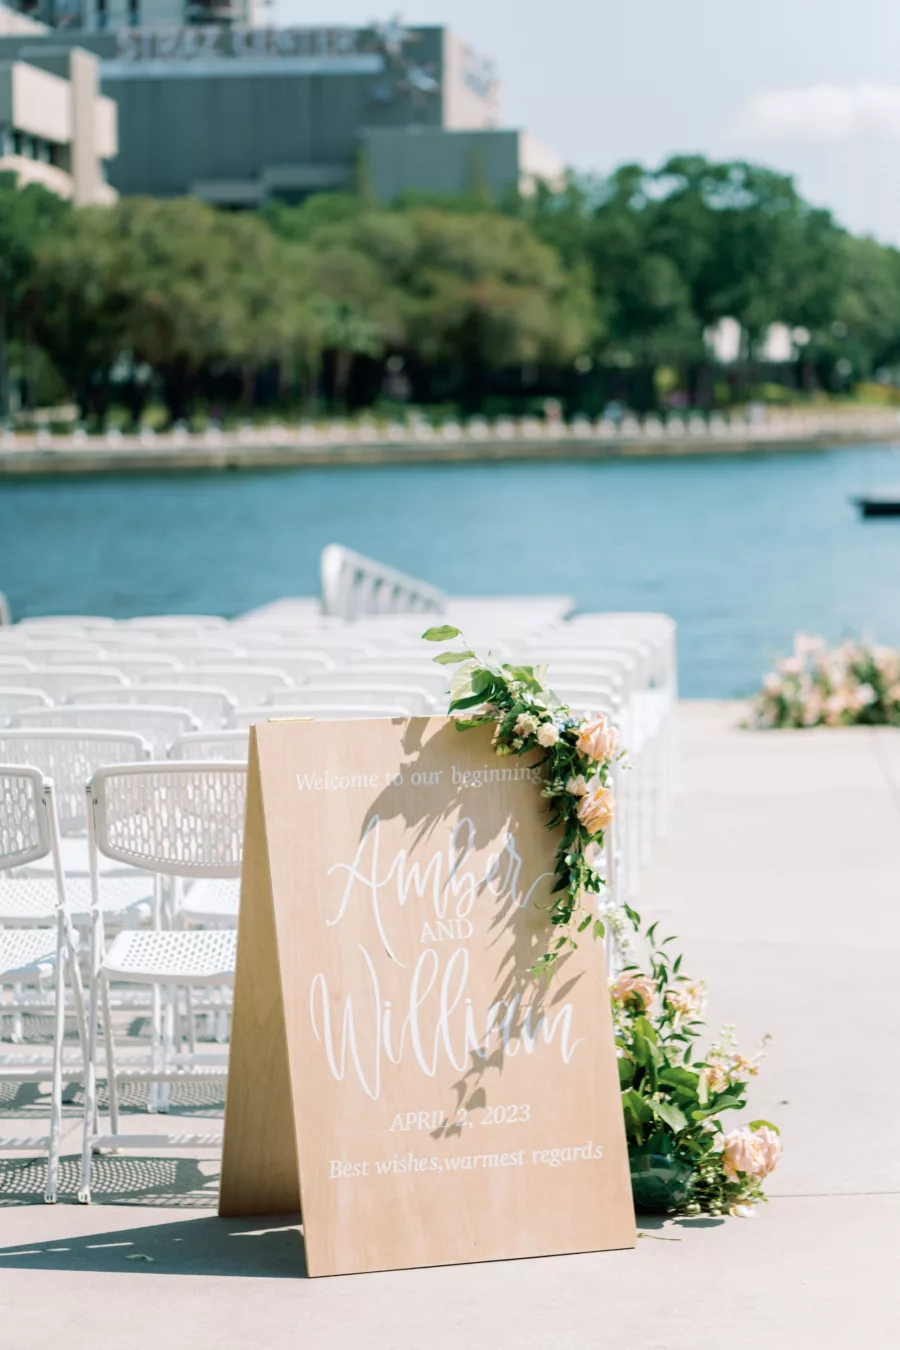 Sandwich Board Wedding Ceremony Sign Decor Inspiration with Pink and Orange Roses, and Greenery